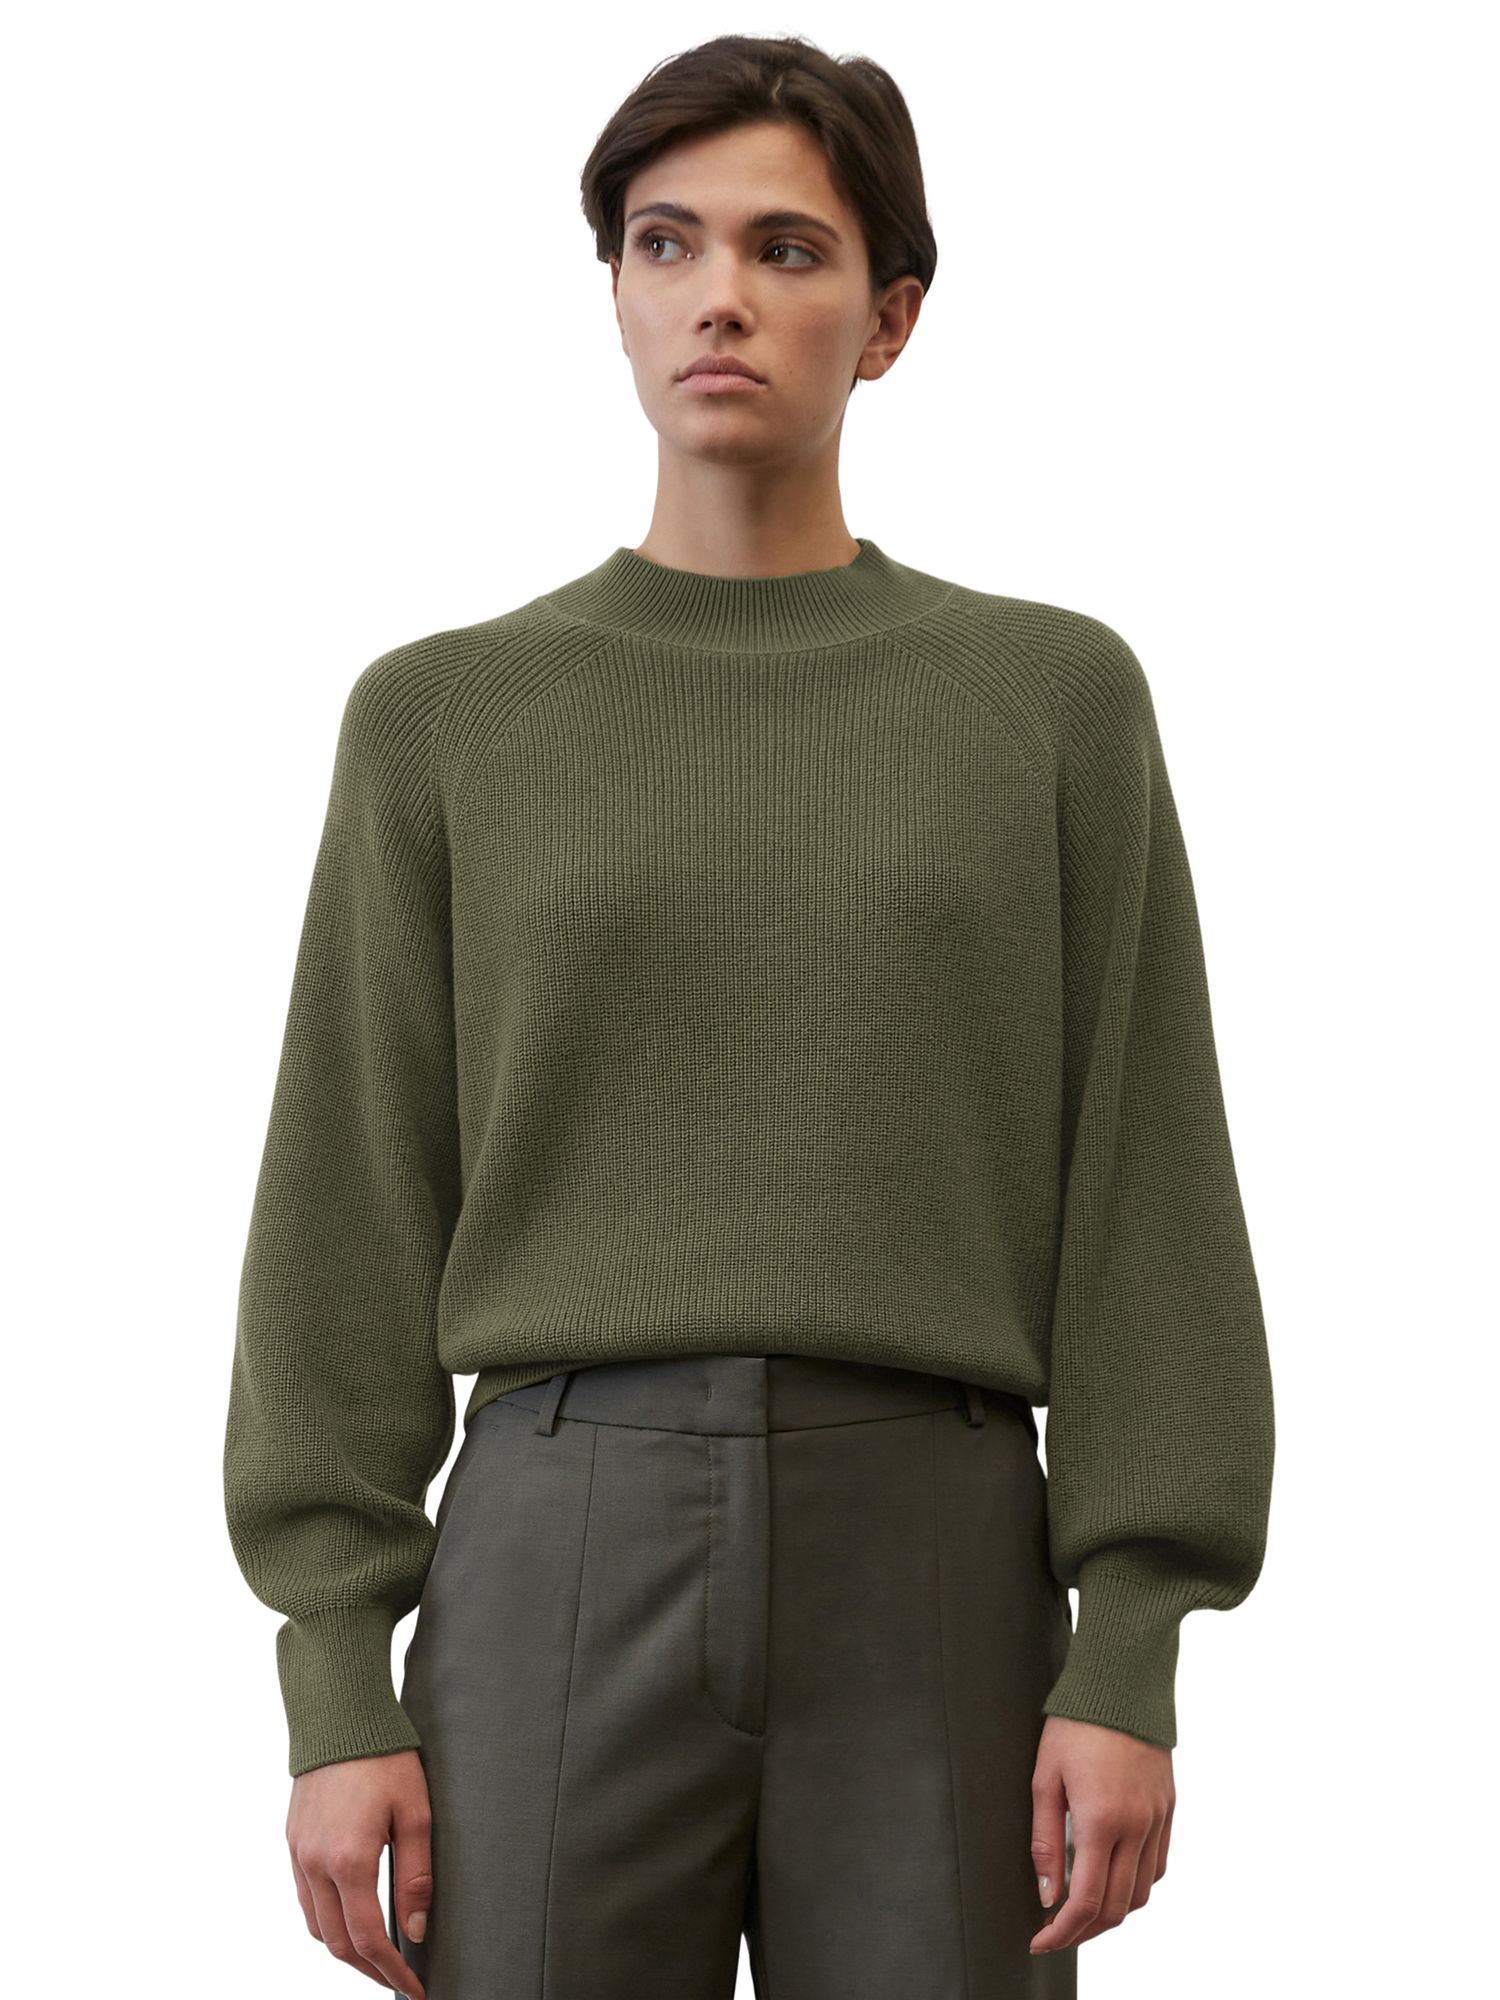 Marc O'Polo Cropped Knitted Jumper, Wild Olive, S